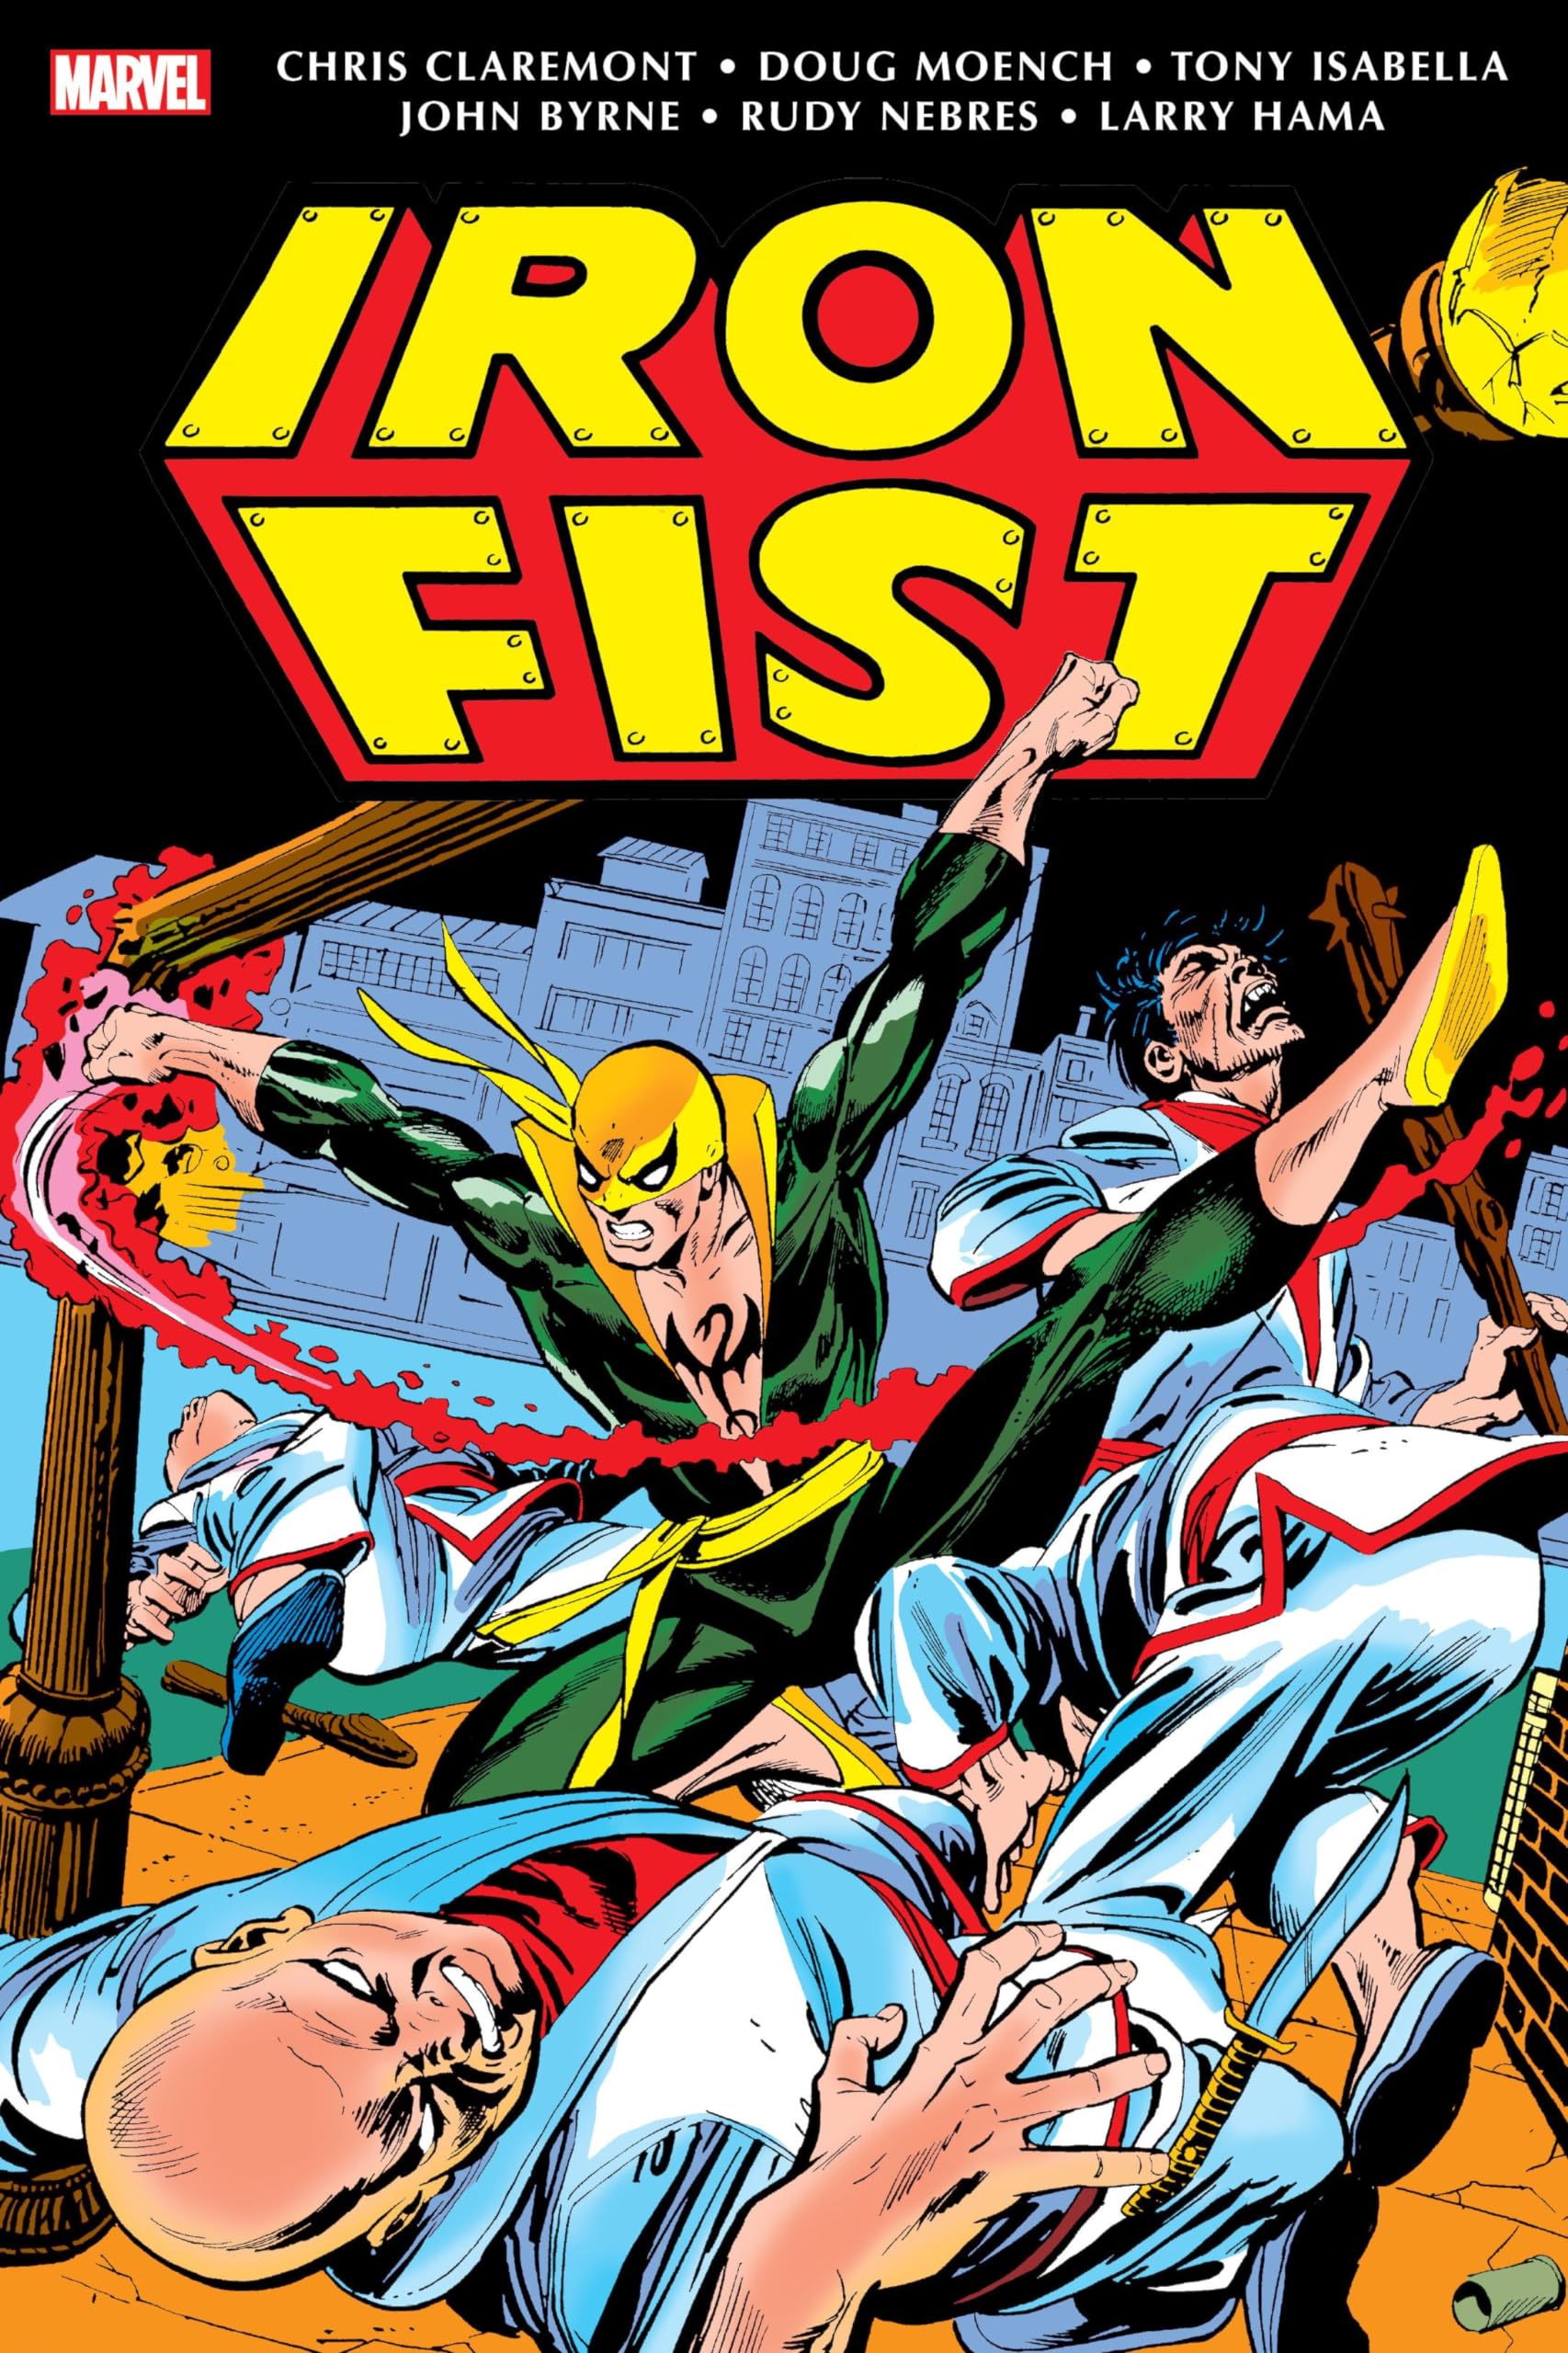 EXCLUSIVE: Iron Fist #1 Introduces Danny Rand's Mysterious Replacement